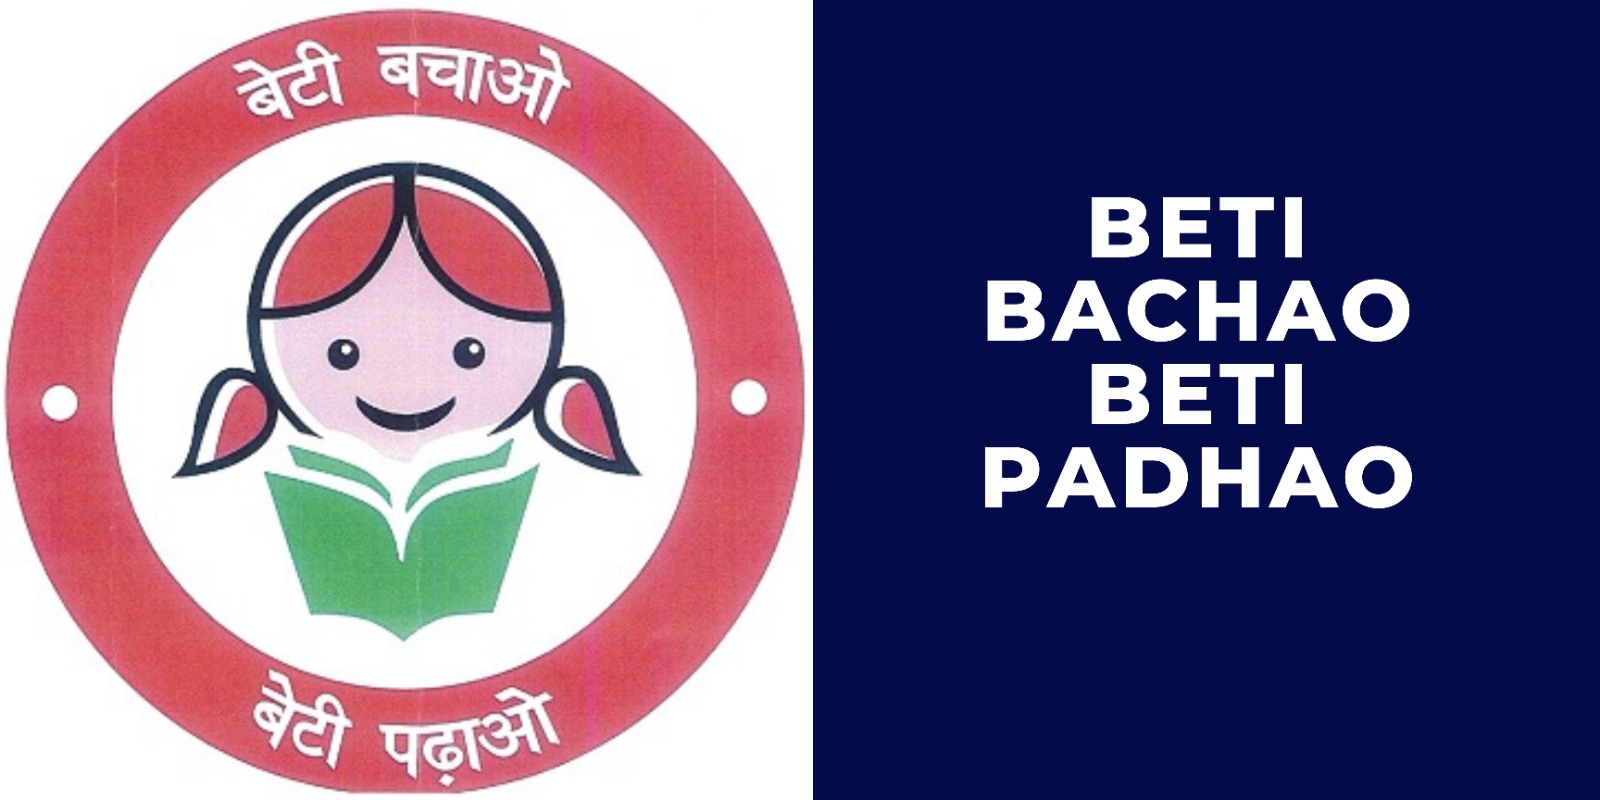 Beti Bachao Beti Padhao: Caring for the Girl Child